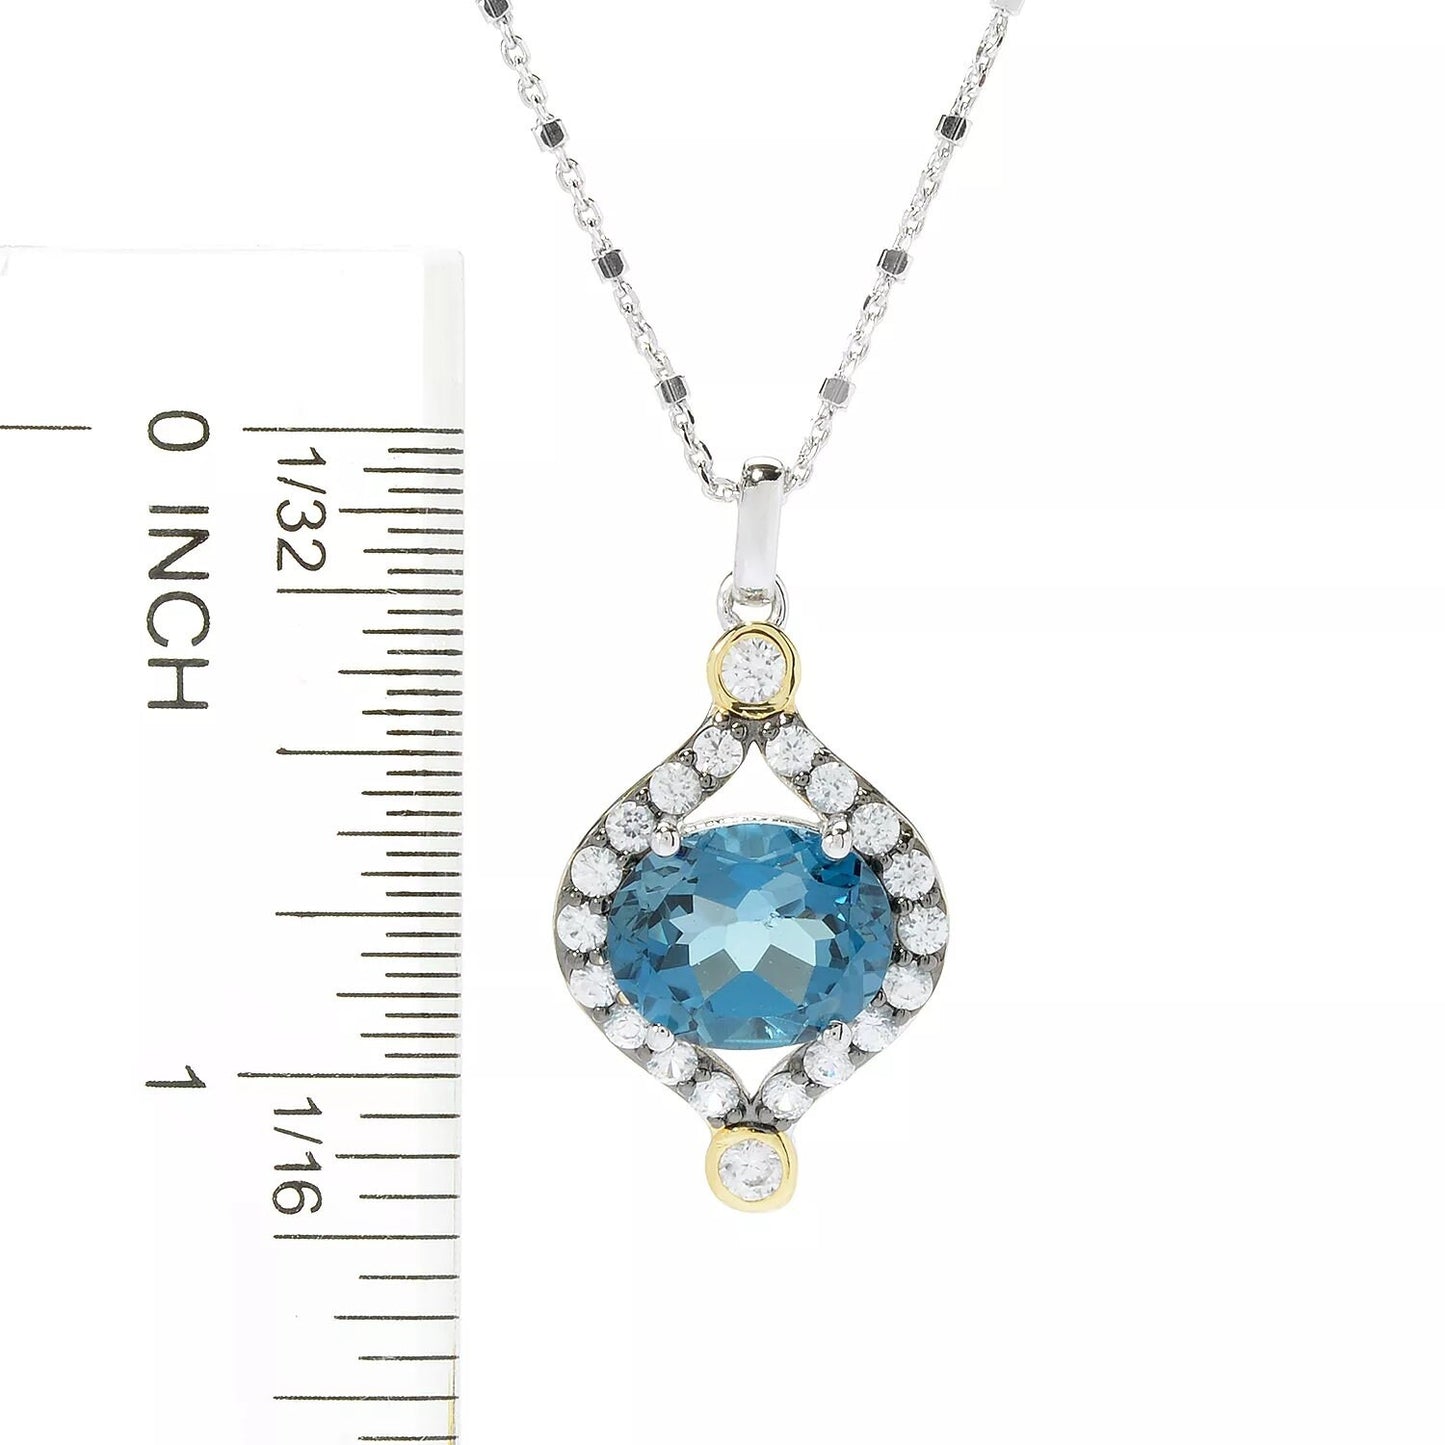 London Blue Topaz With White Zircon Gemstone Pendant, 925 Sterling Silver Pendant, Anniversary Gift, Gifts For Her